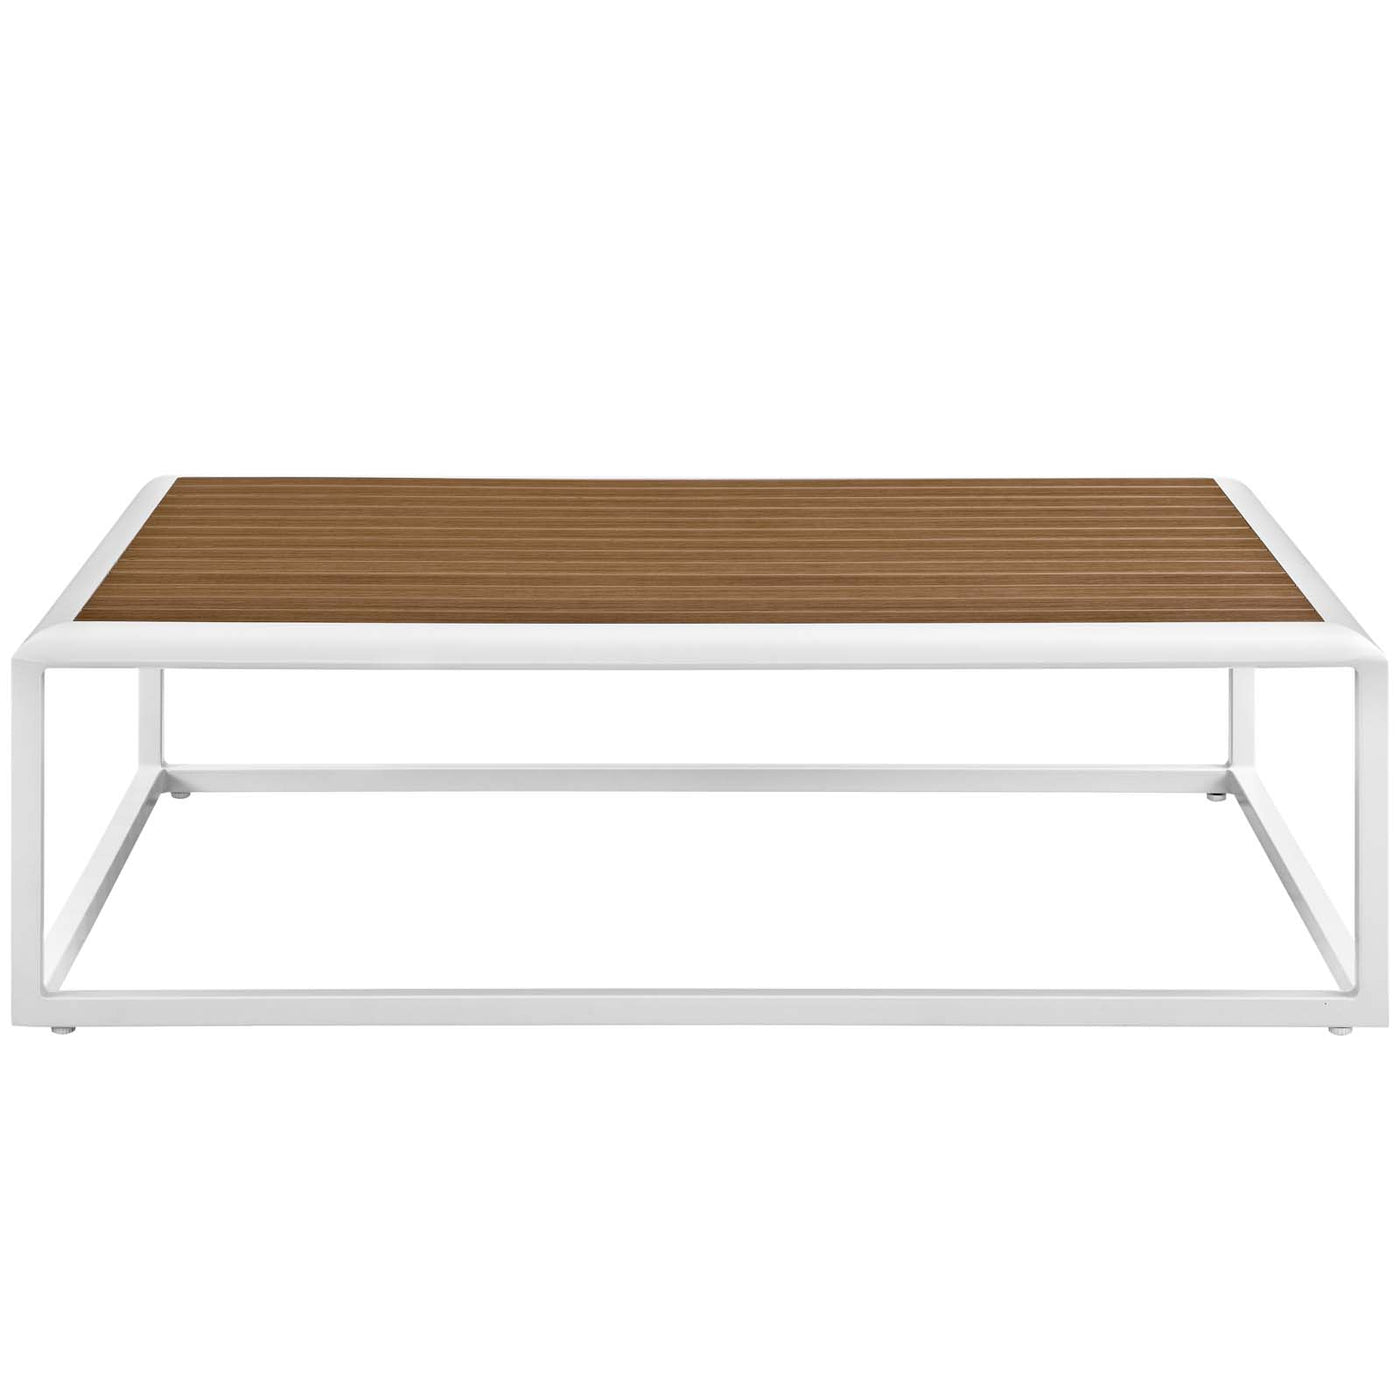 Stance Outdoor Patio Aluminum Coffee Table